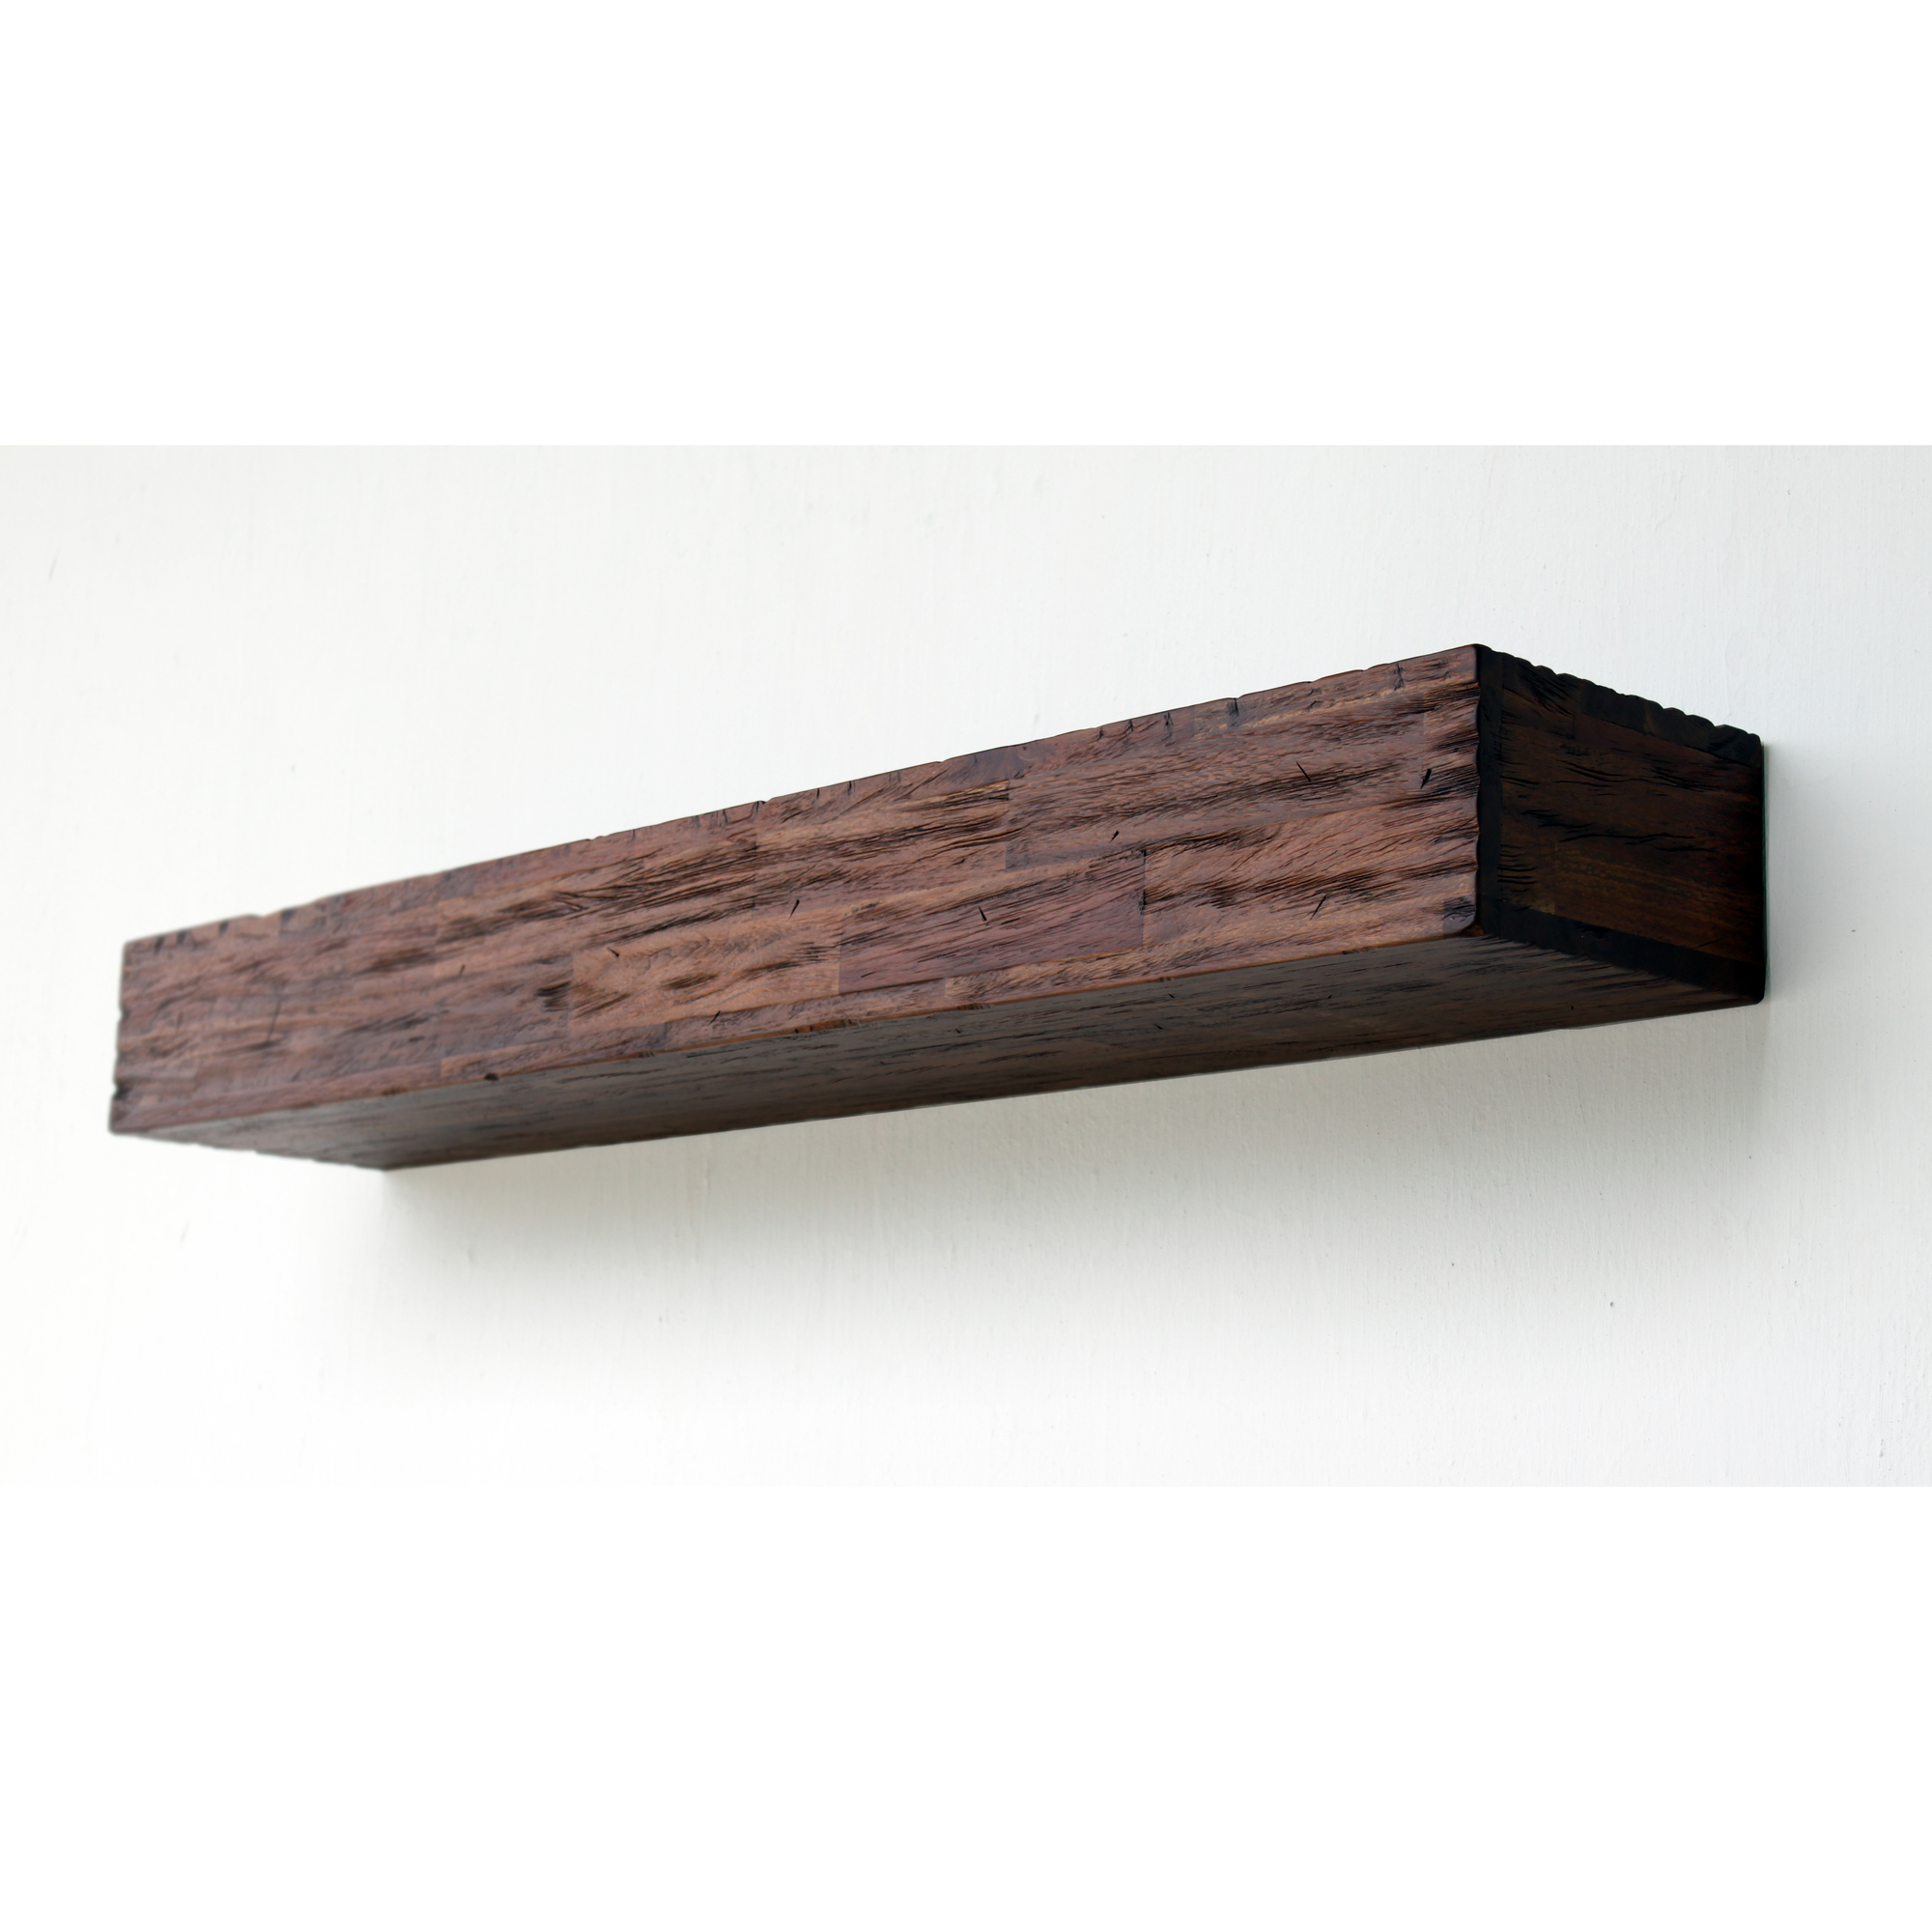 Merry Products, Fireplace Mantel Wall Shelf Beam 72Inch, Width 72 in, Depth 8.5 in, Material Wood, Model SLF0230115010